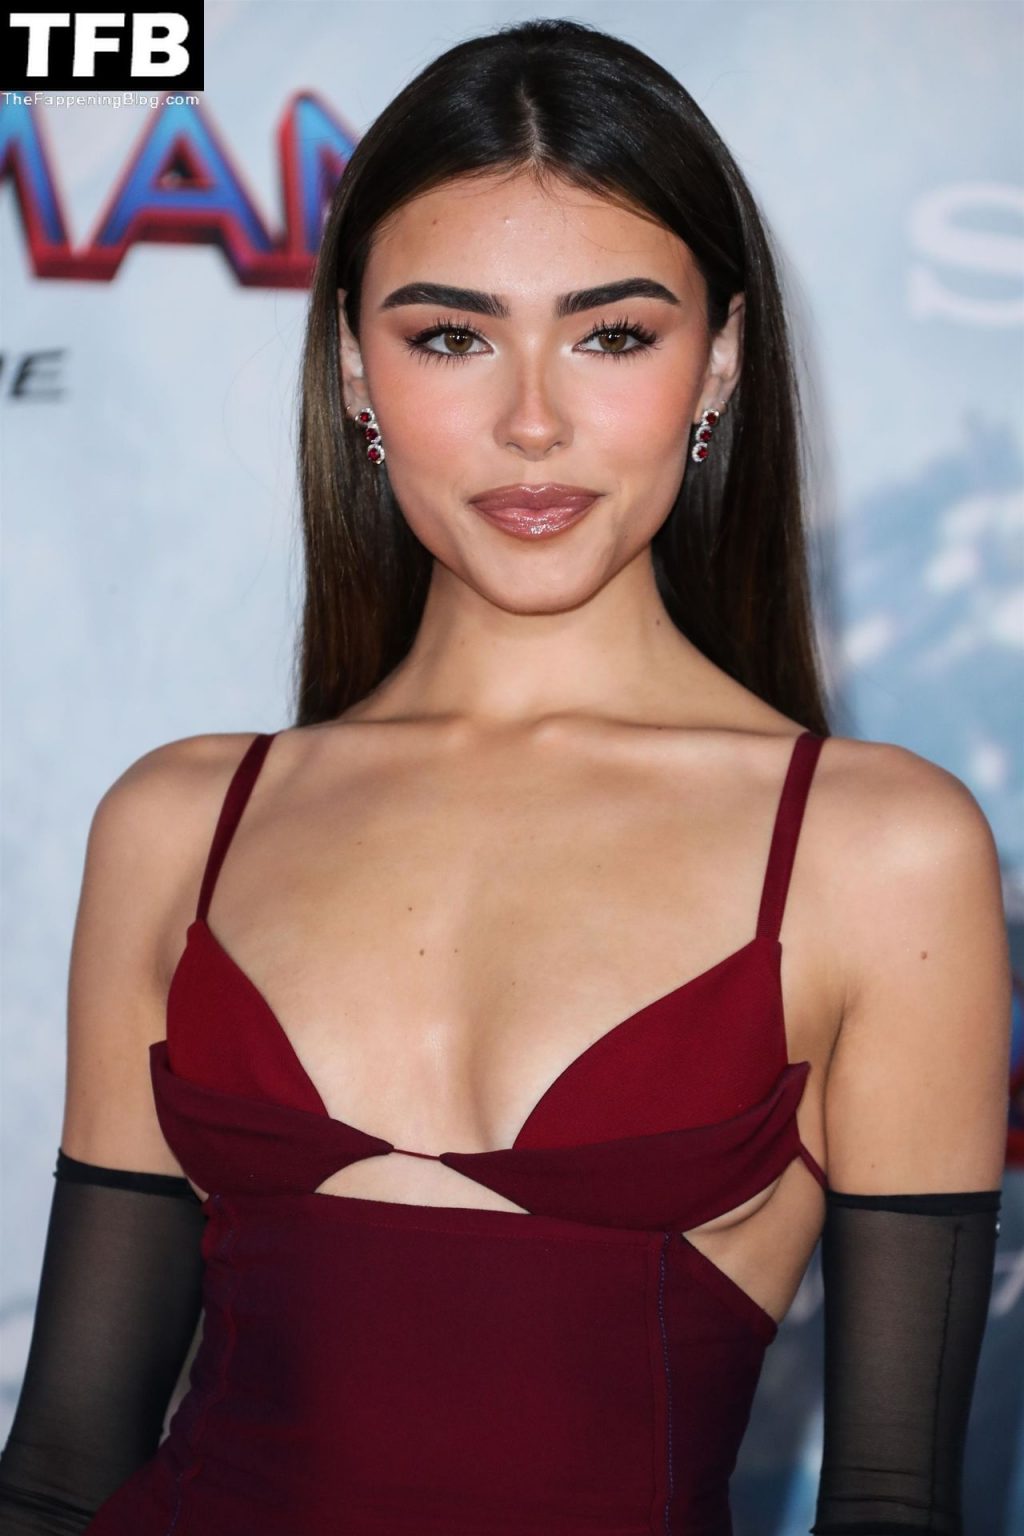 Madison Beer Wows in a Red Dress at the Premiere of “Spider-Man: No Way Home” in LA (93 New Photos + Video)